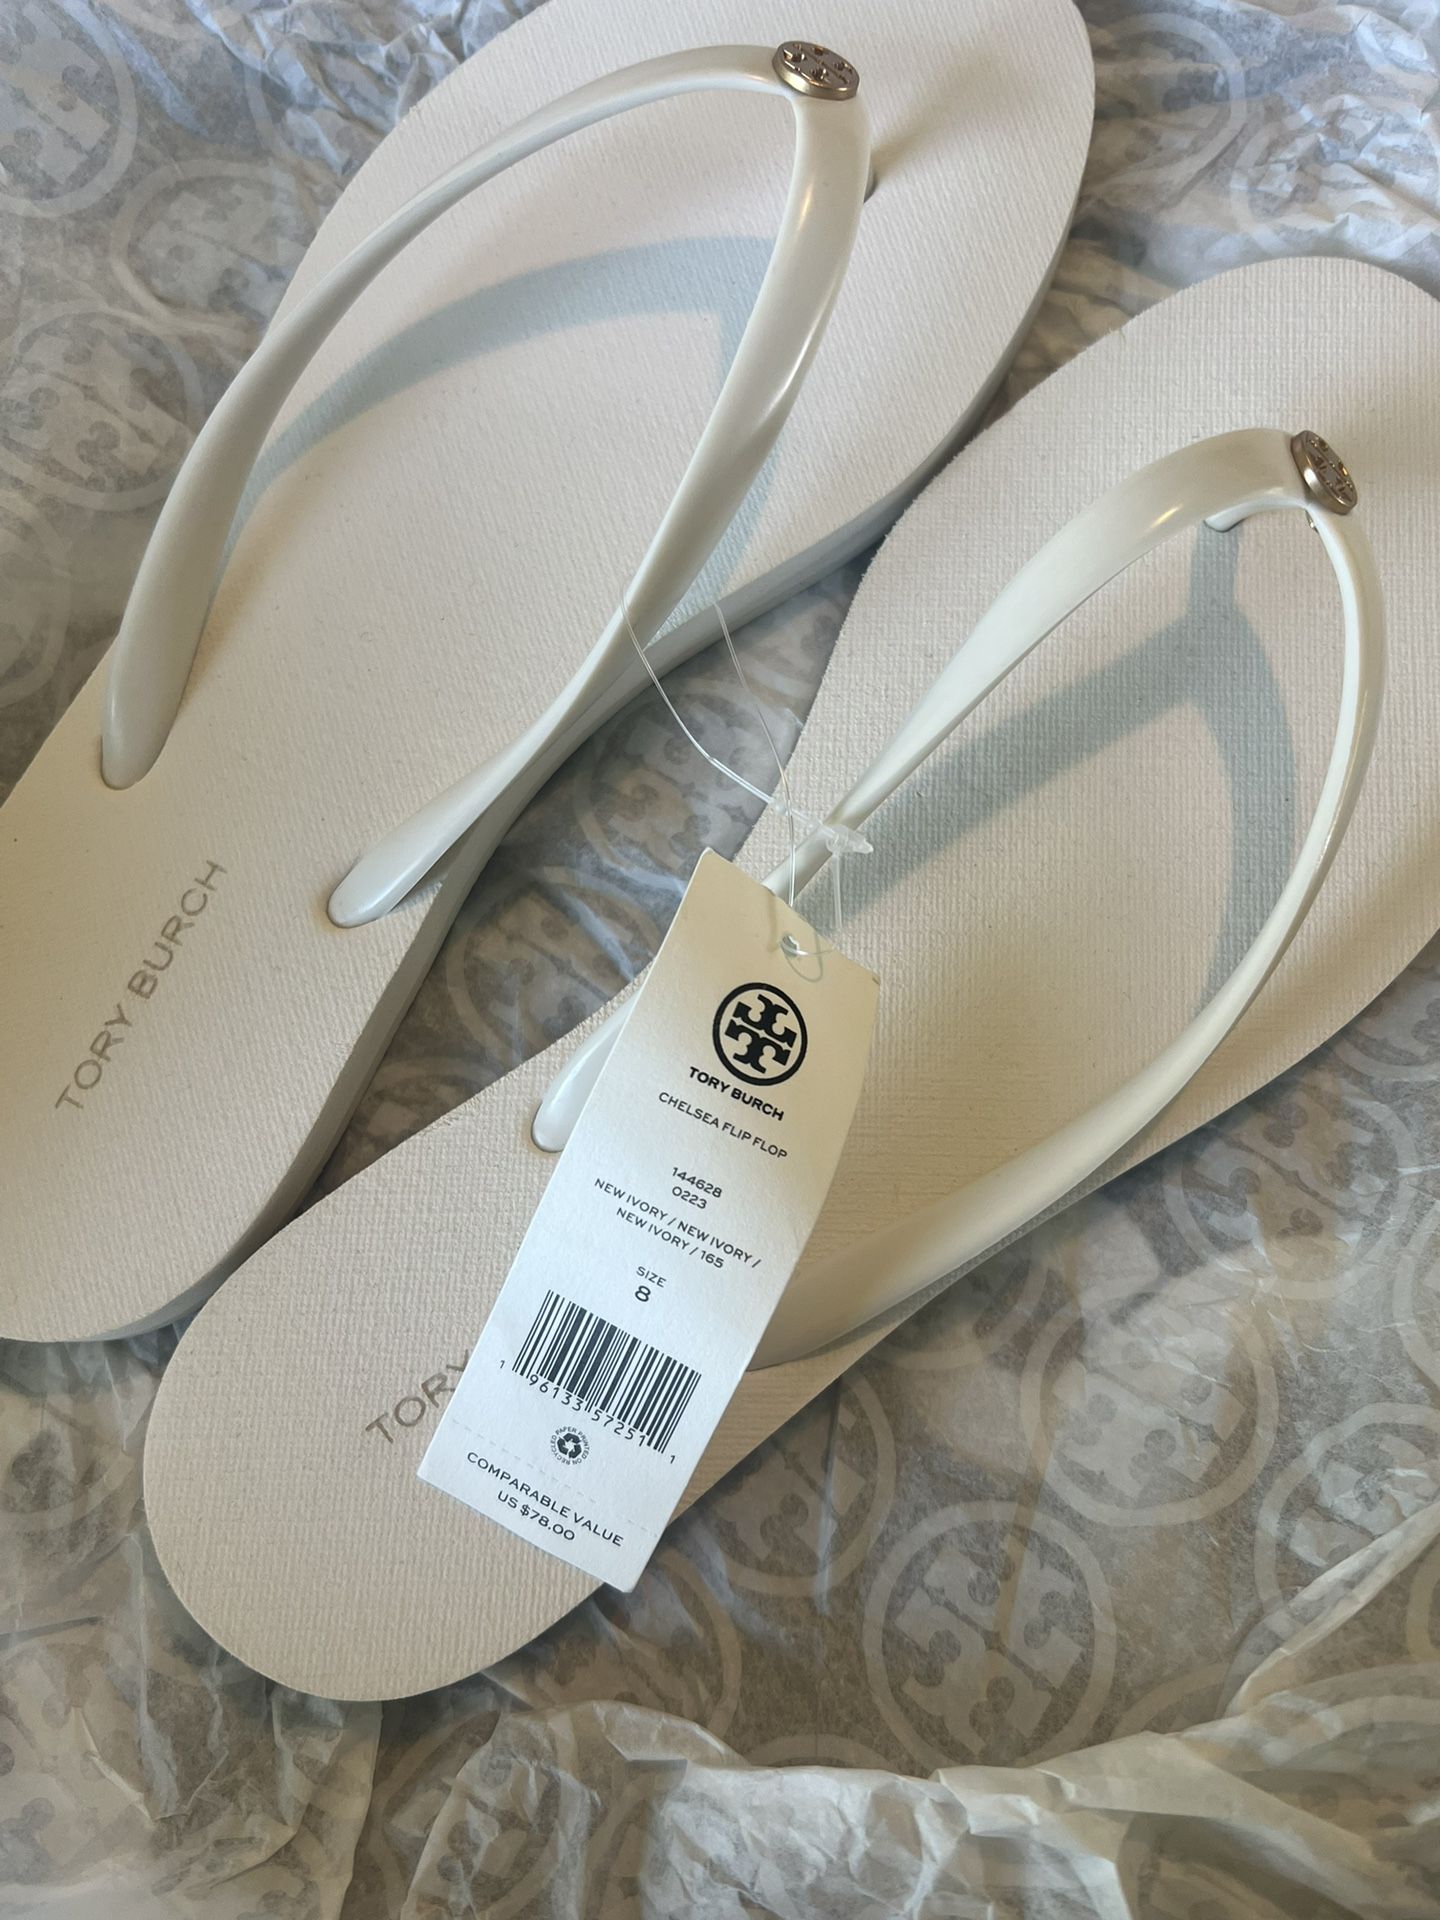 Brand New Tory Burch Sandals Size 8